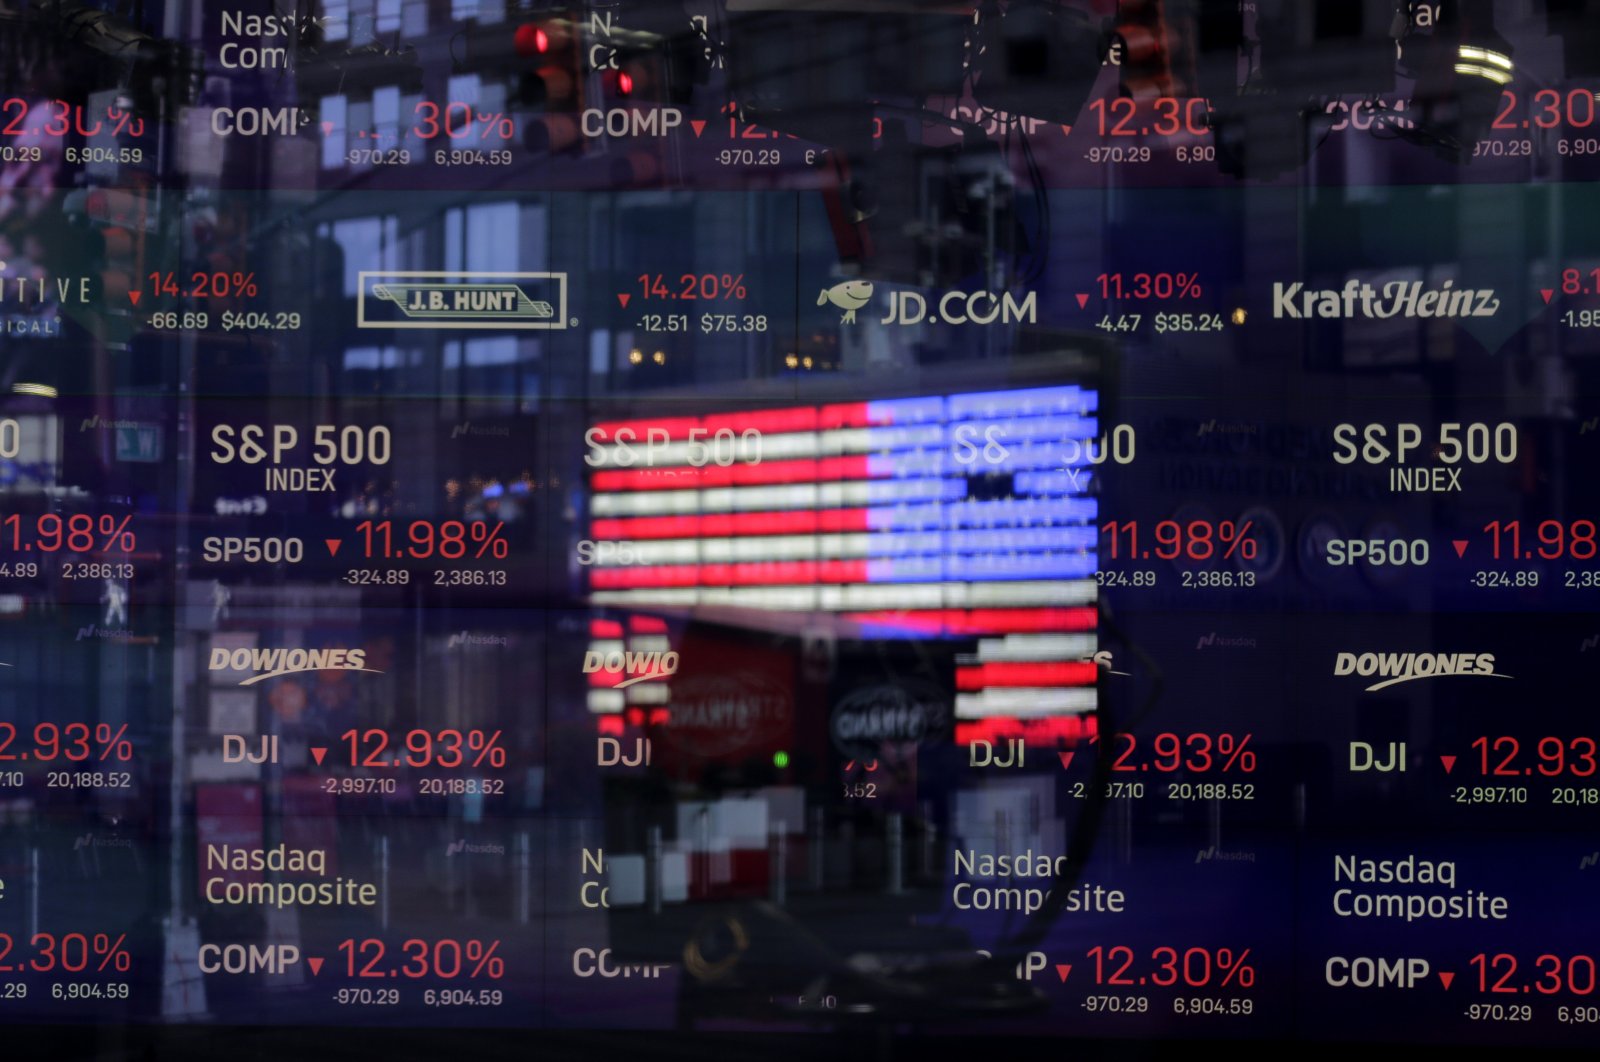 A United States flag is reflected in the window of the Nasdaq studio, which displays indices and stocks down, in Times Square, New York, Monday, March 16, 2020. (AP Photo)